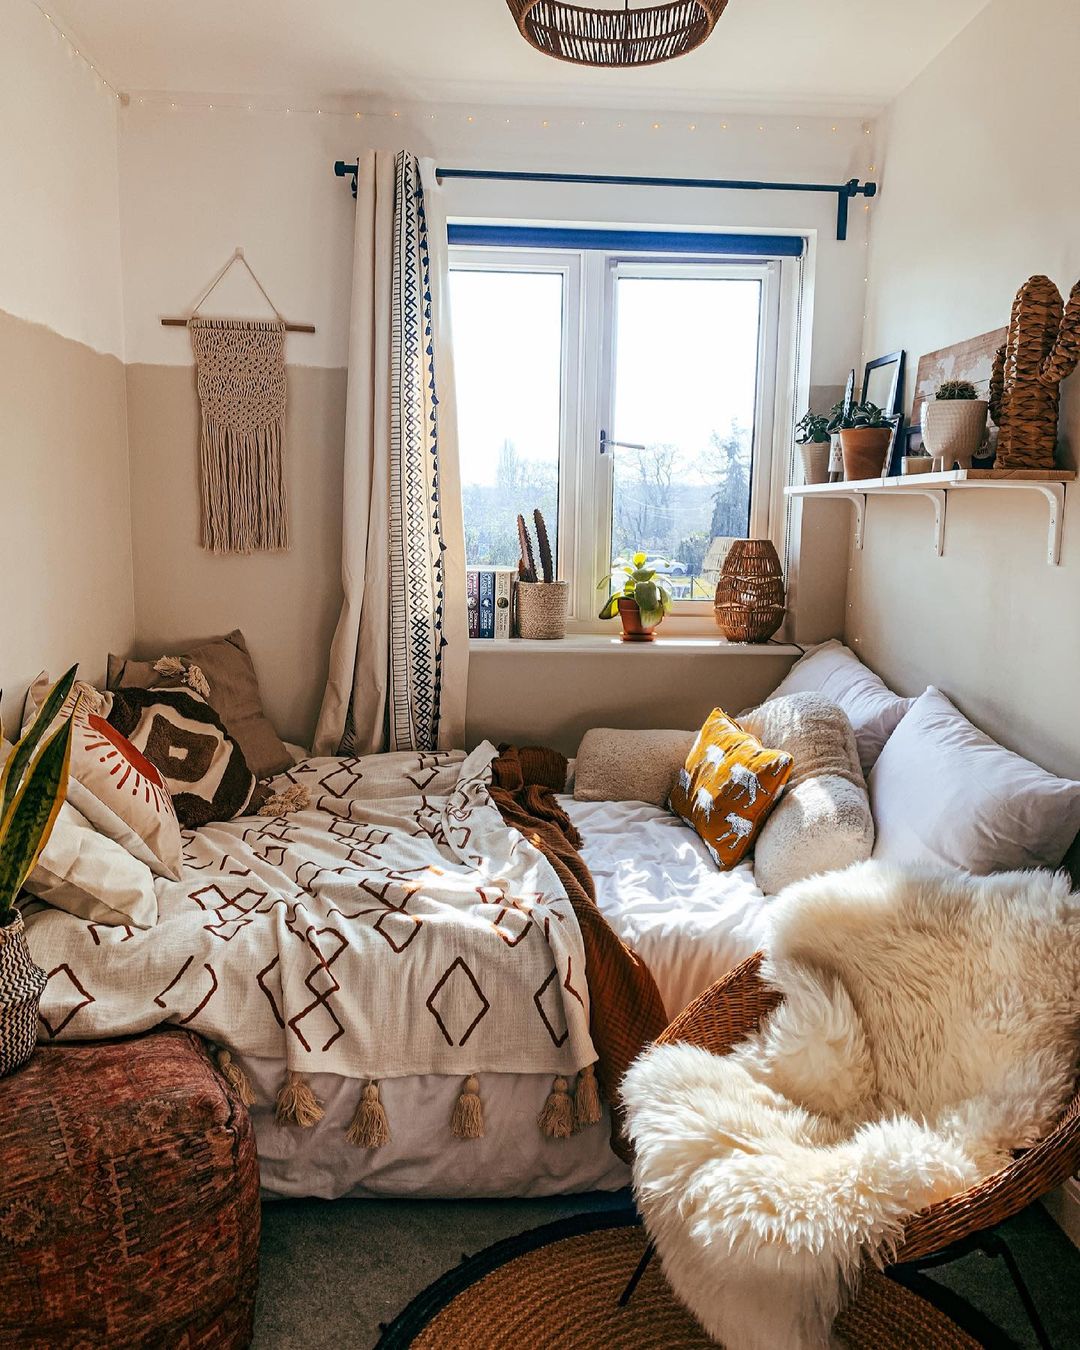 + Small Bedroom Ideas That Make the Most of Every Square Inch